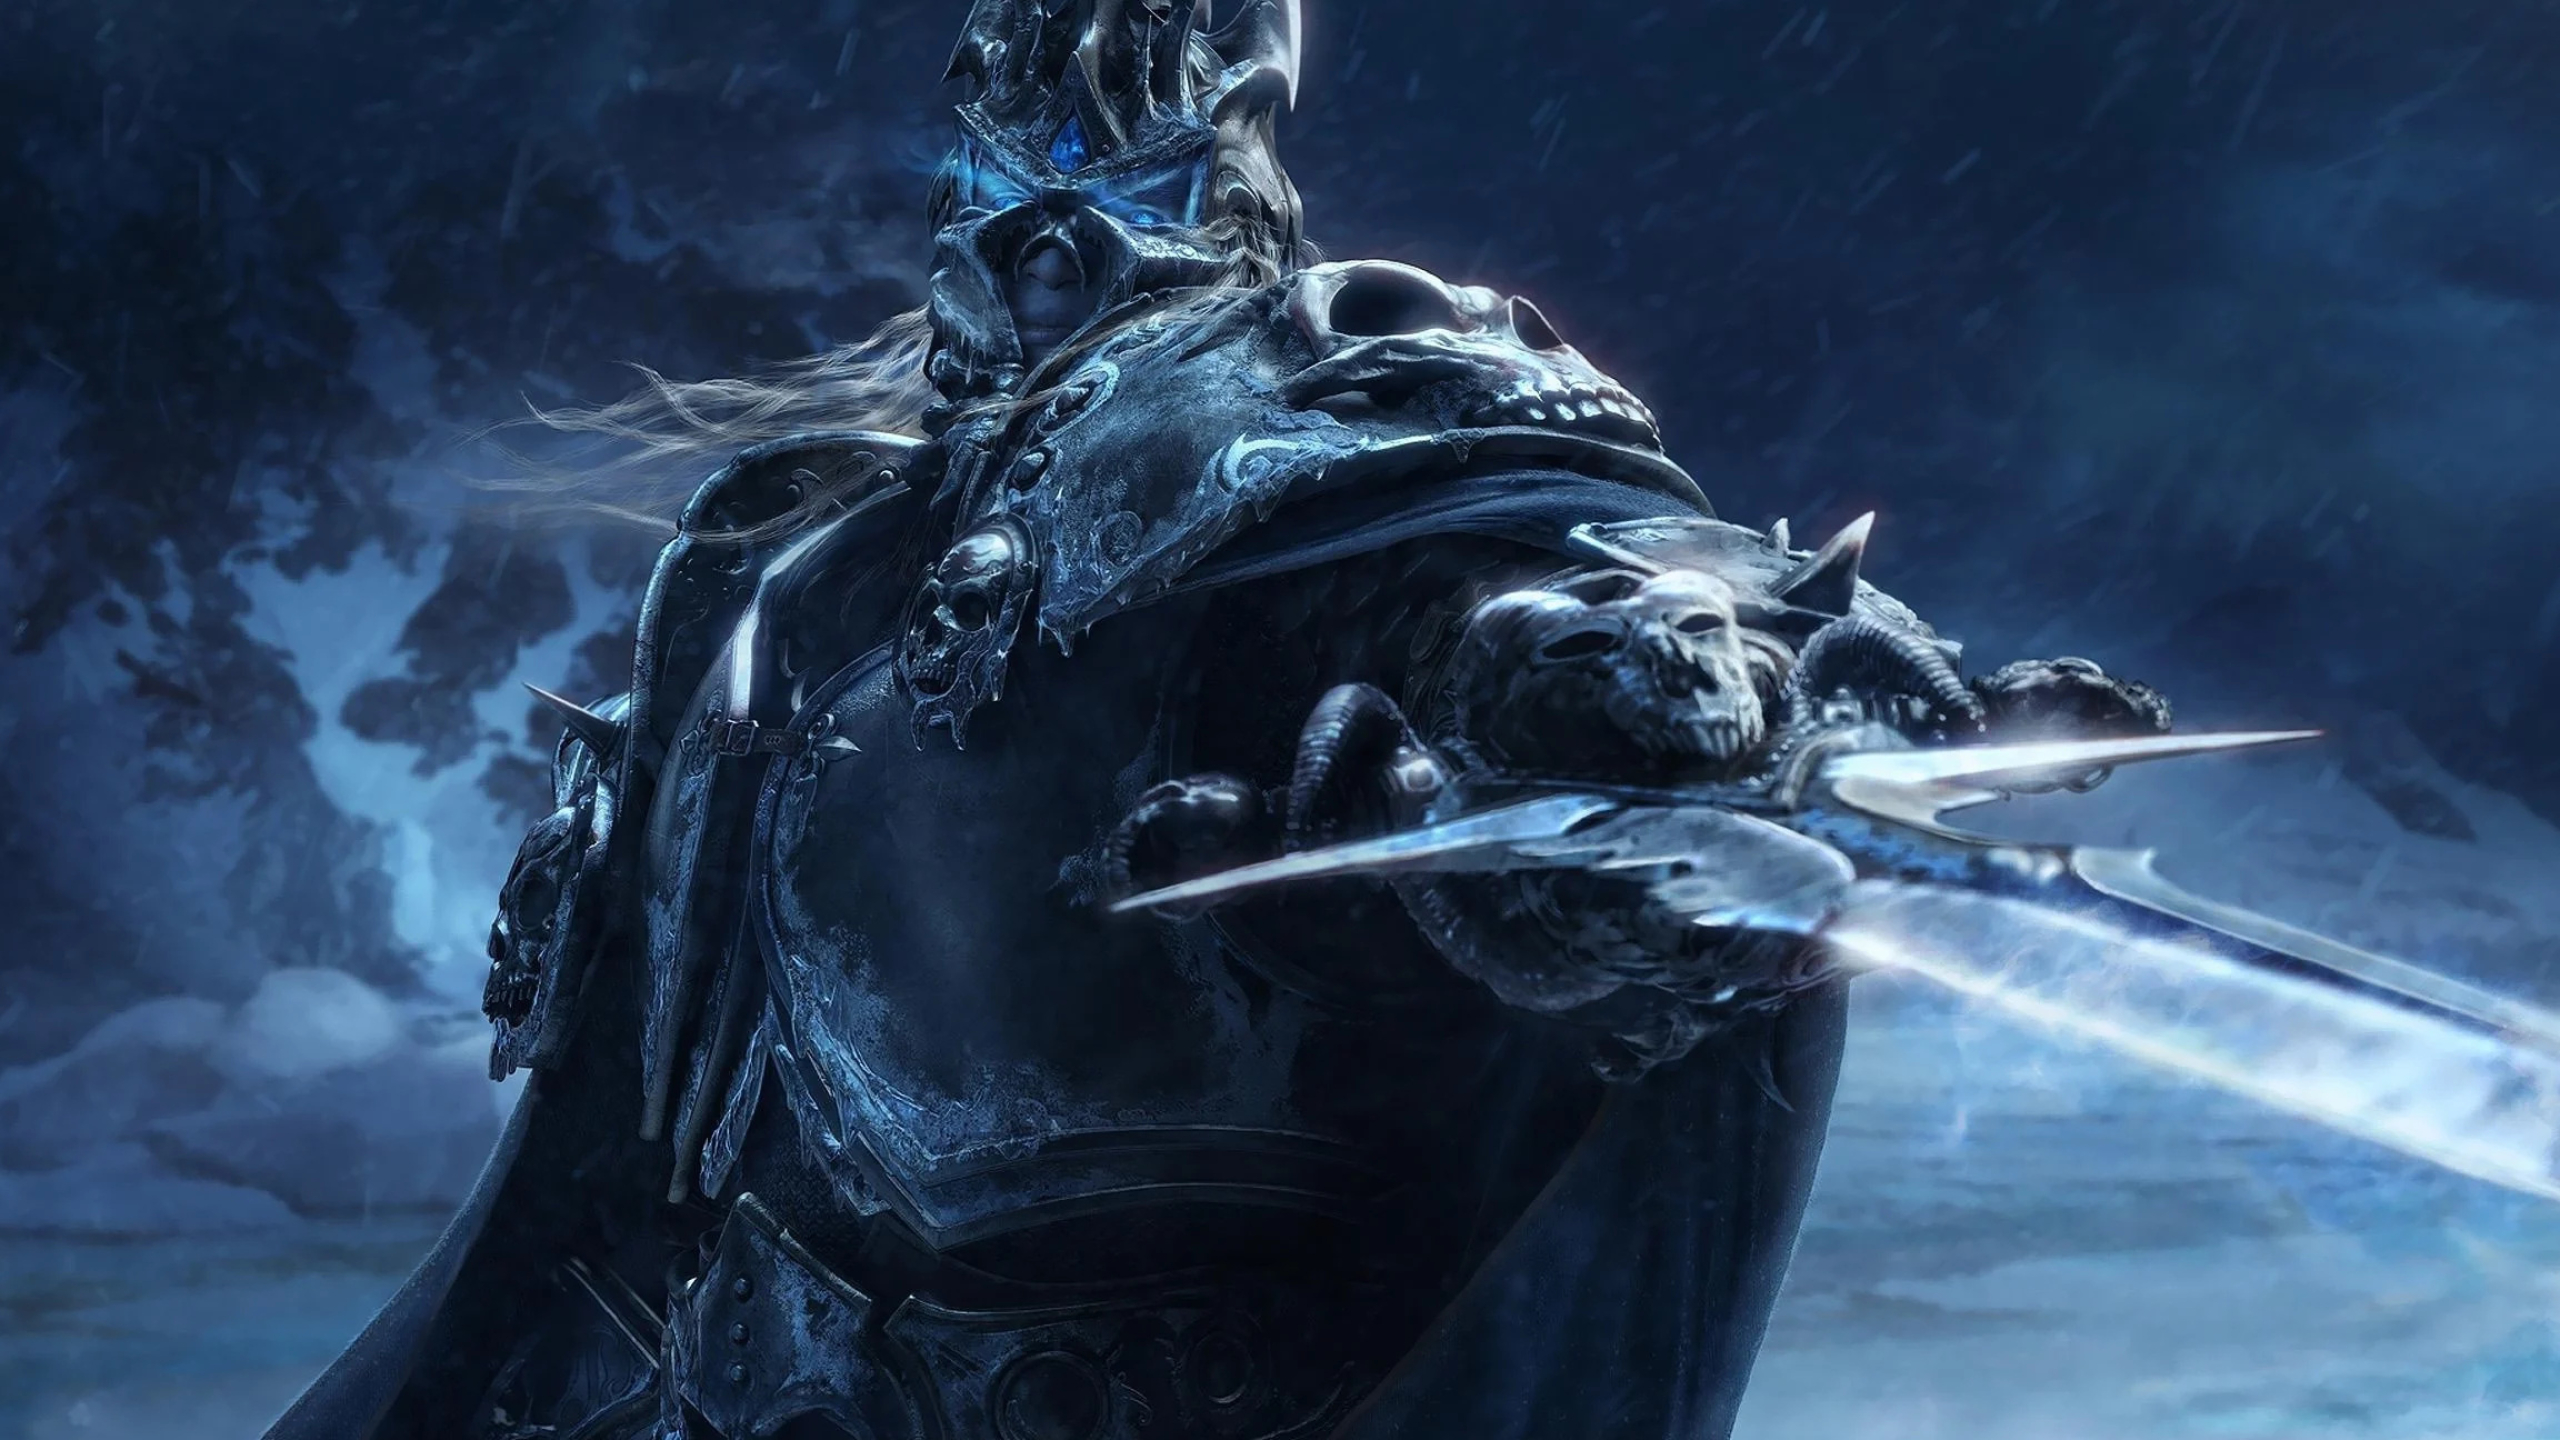 Wrath of the Lich King, Epic fantasy art, Dystopian setting, Chilling atmosphere, 2560x1440 HD Desktop